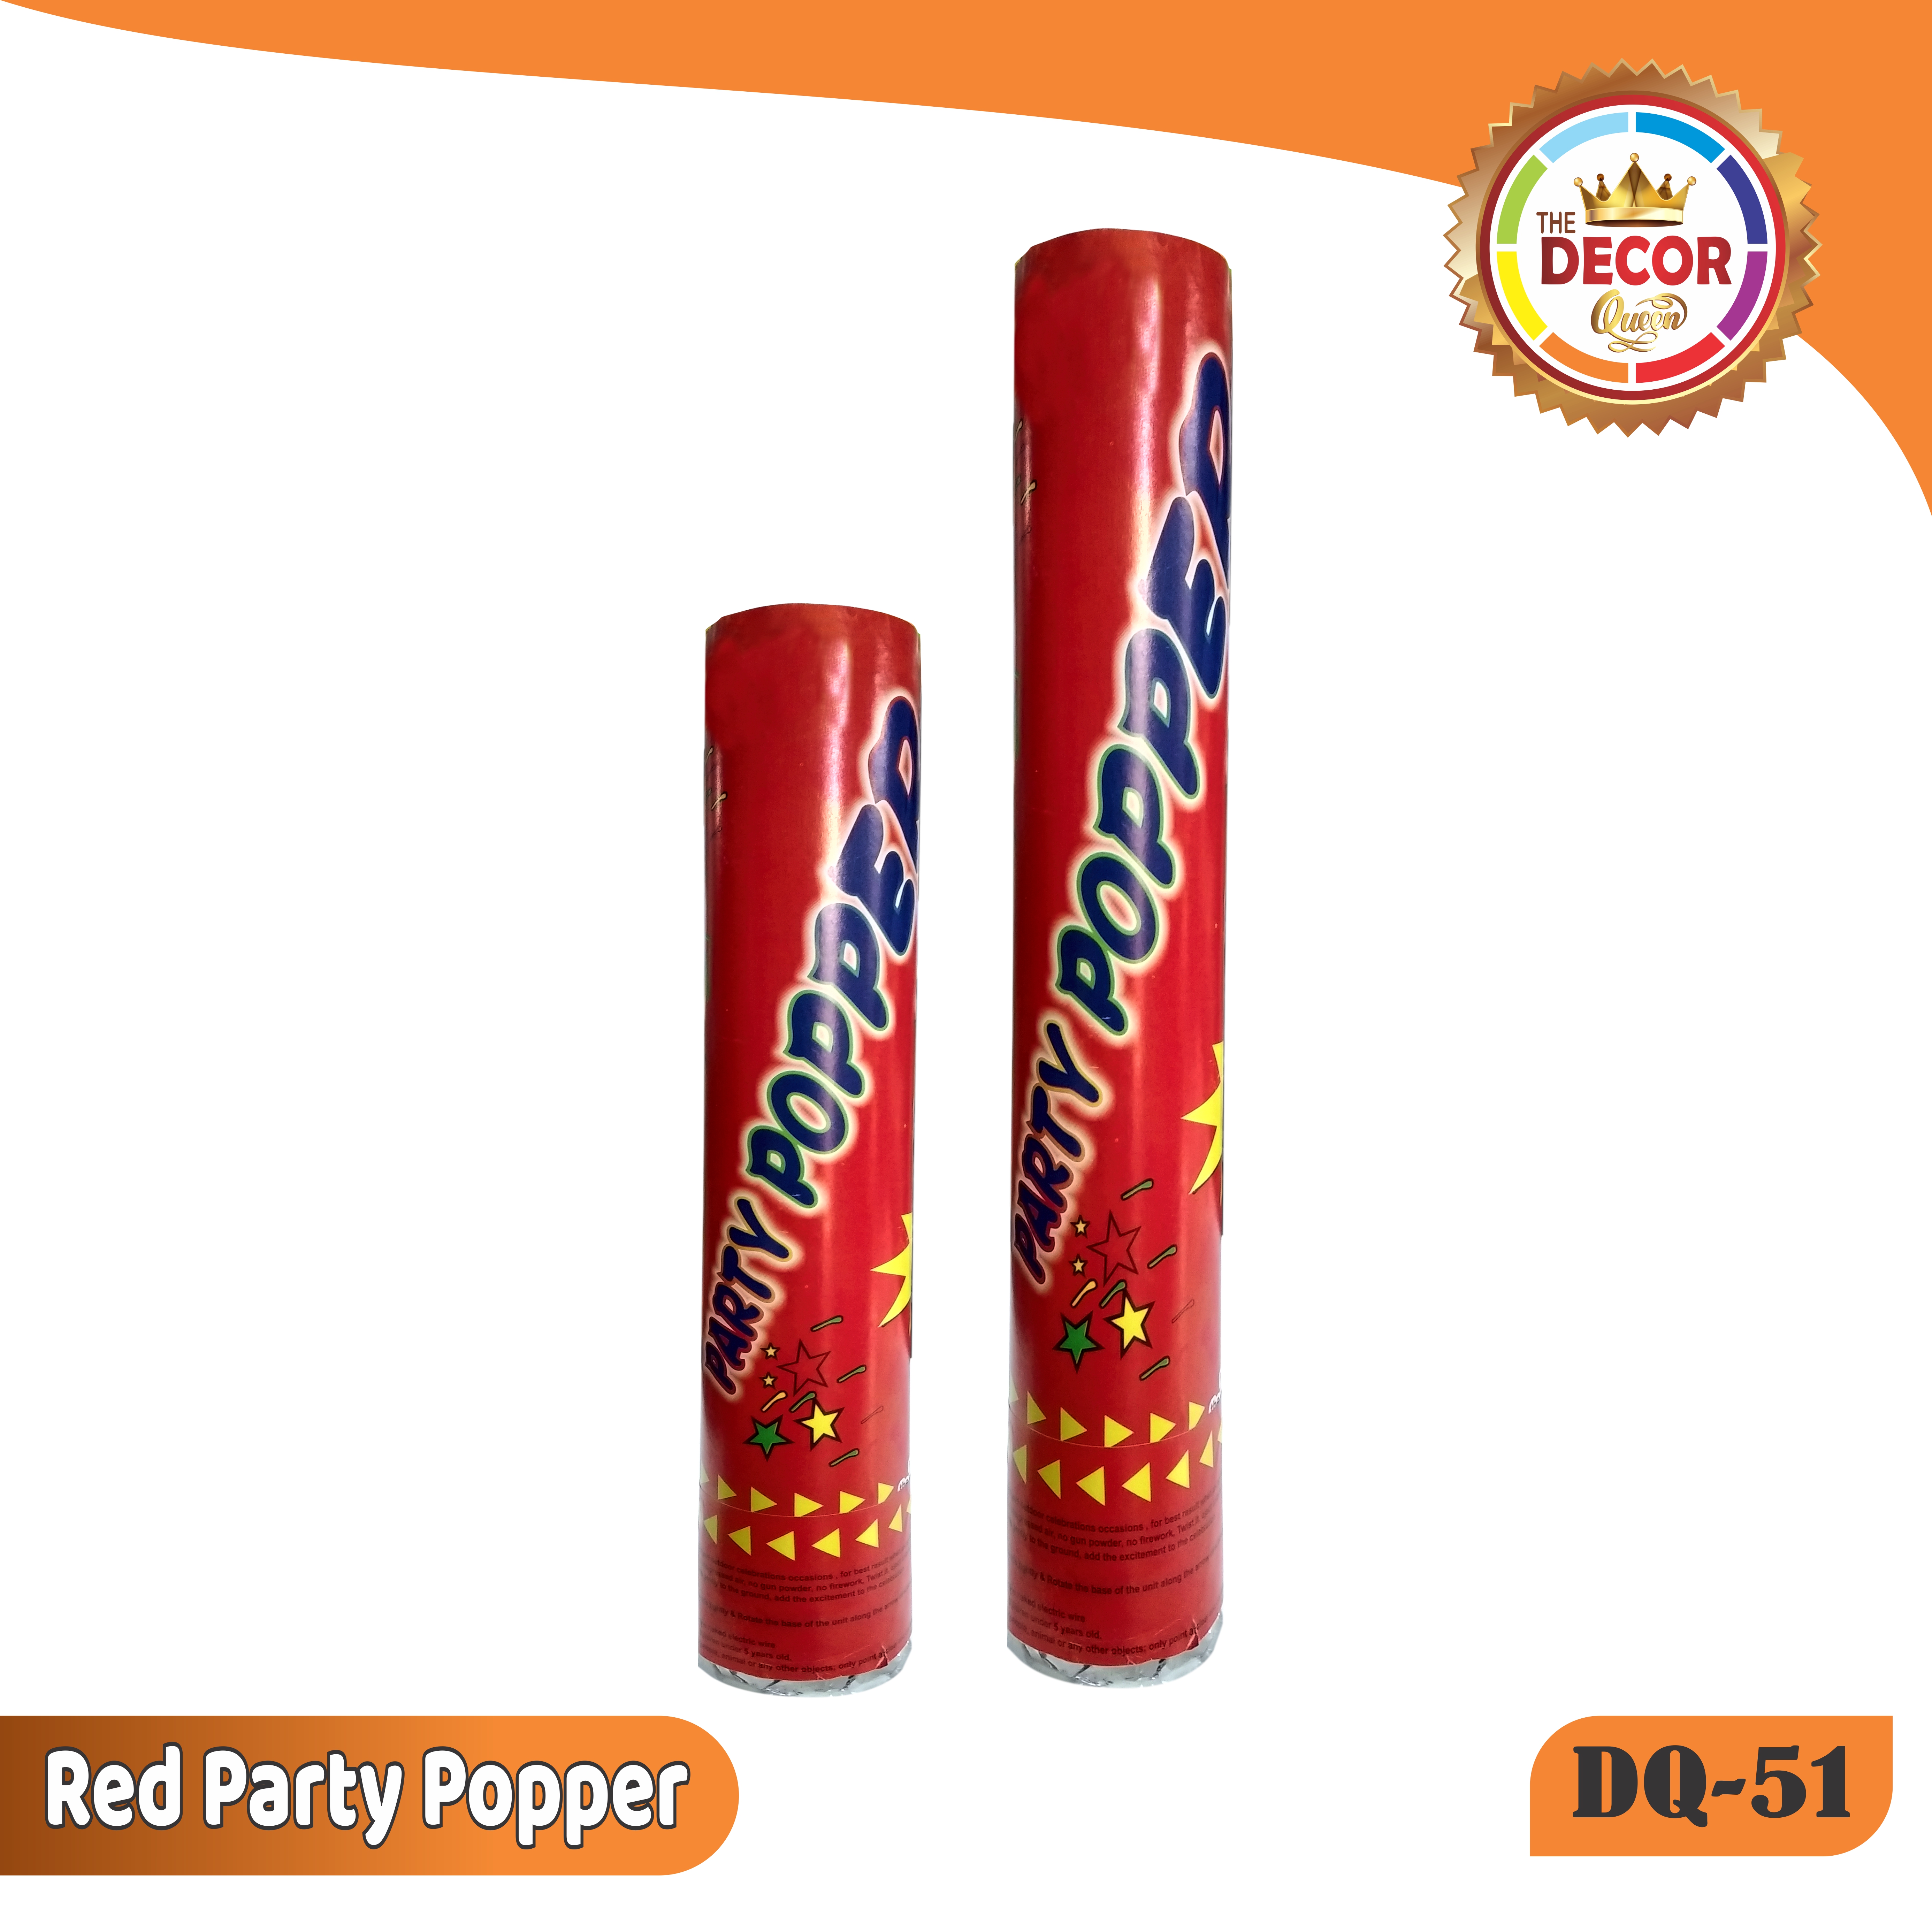 Red Party Popper (PARTY POPPERS)|Party Products|Party Poppers